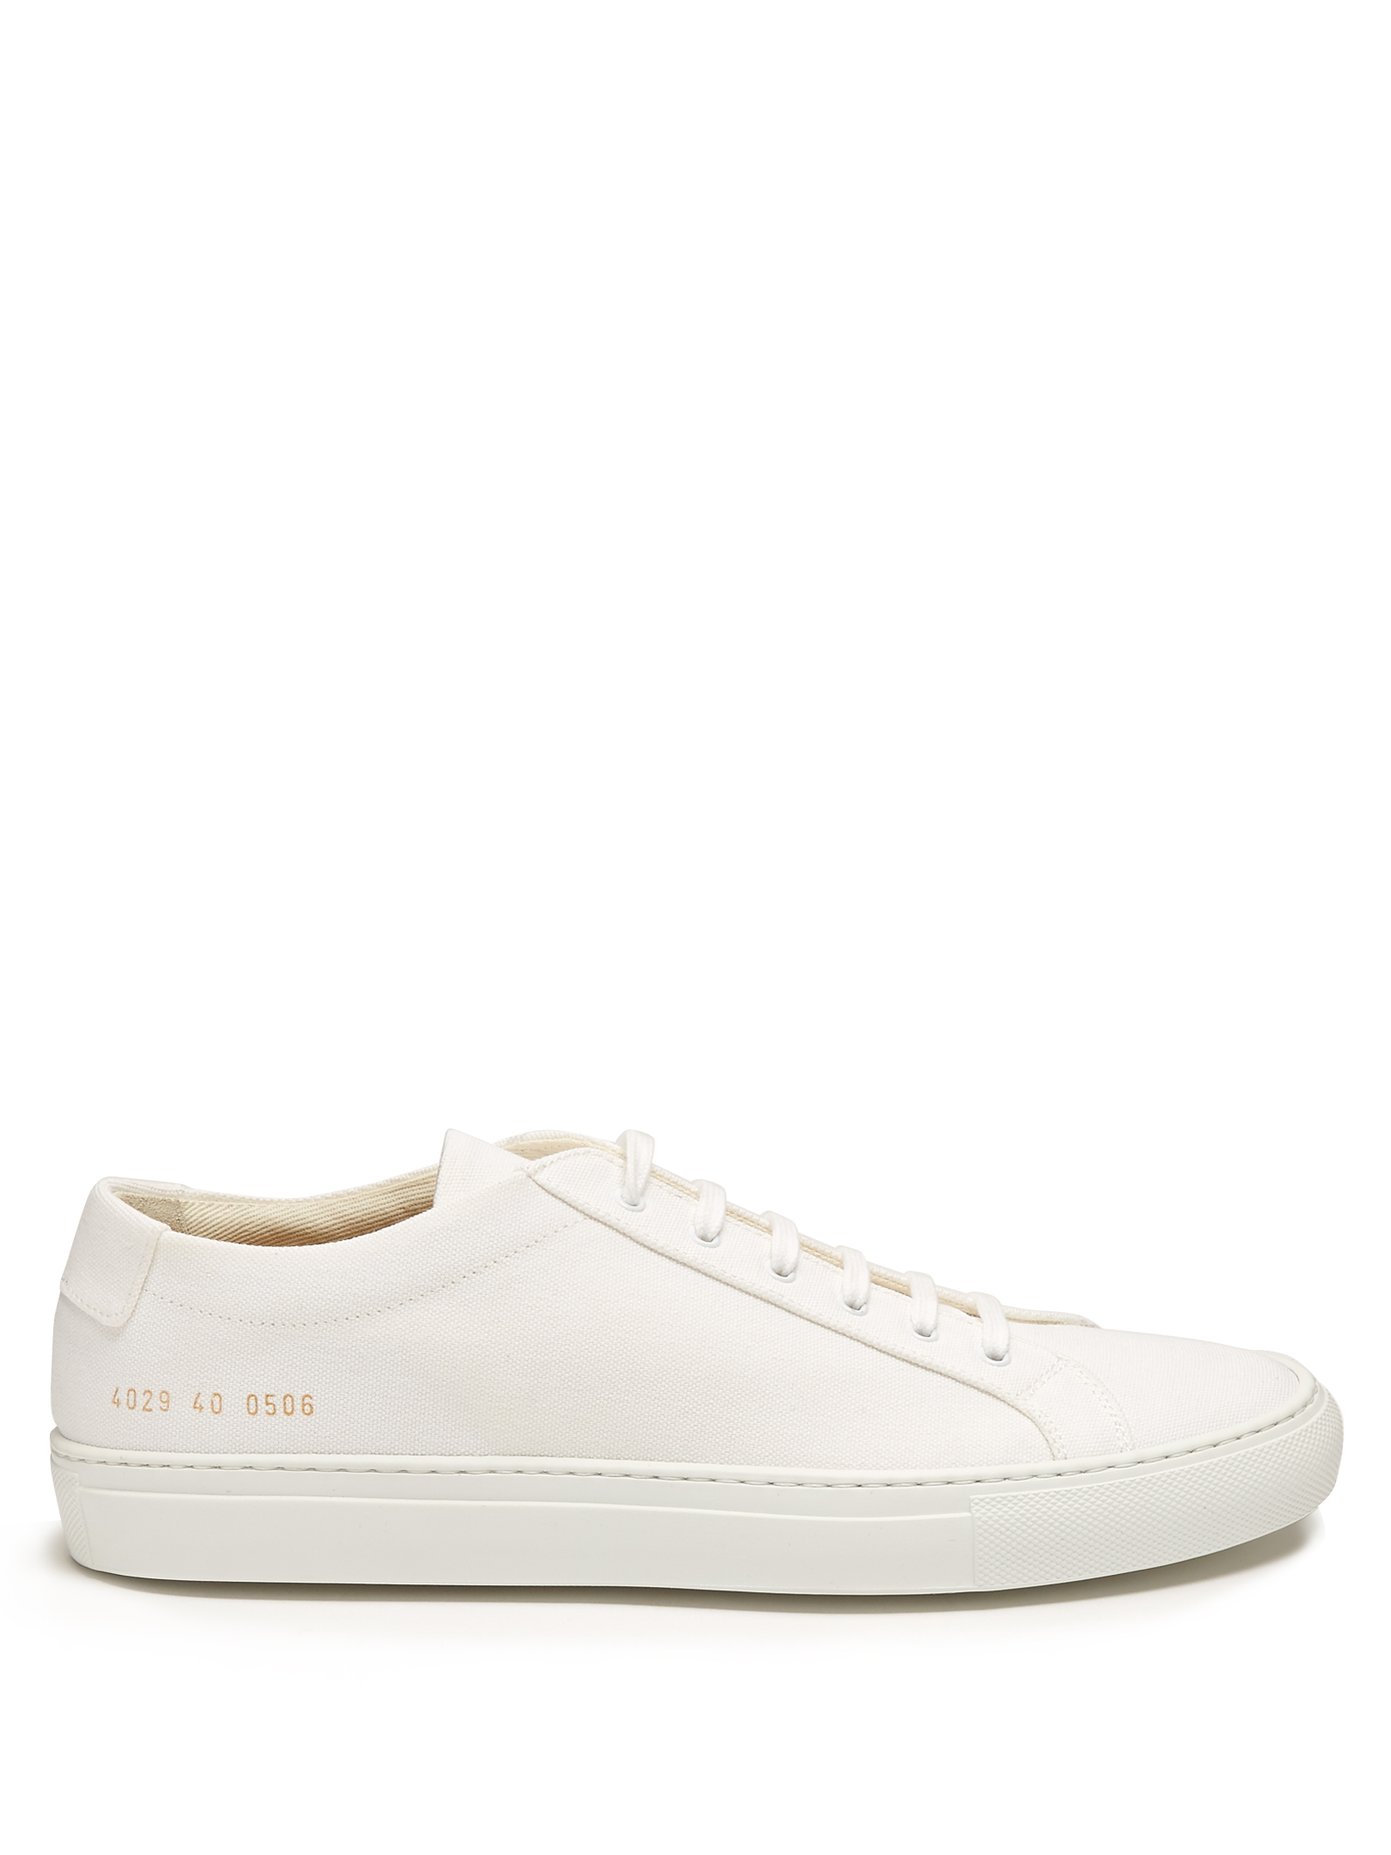 Common Projects Achilles Low Canvas on Sale, UP TO 64% OFF 